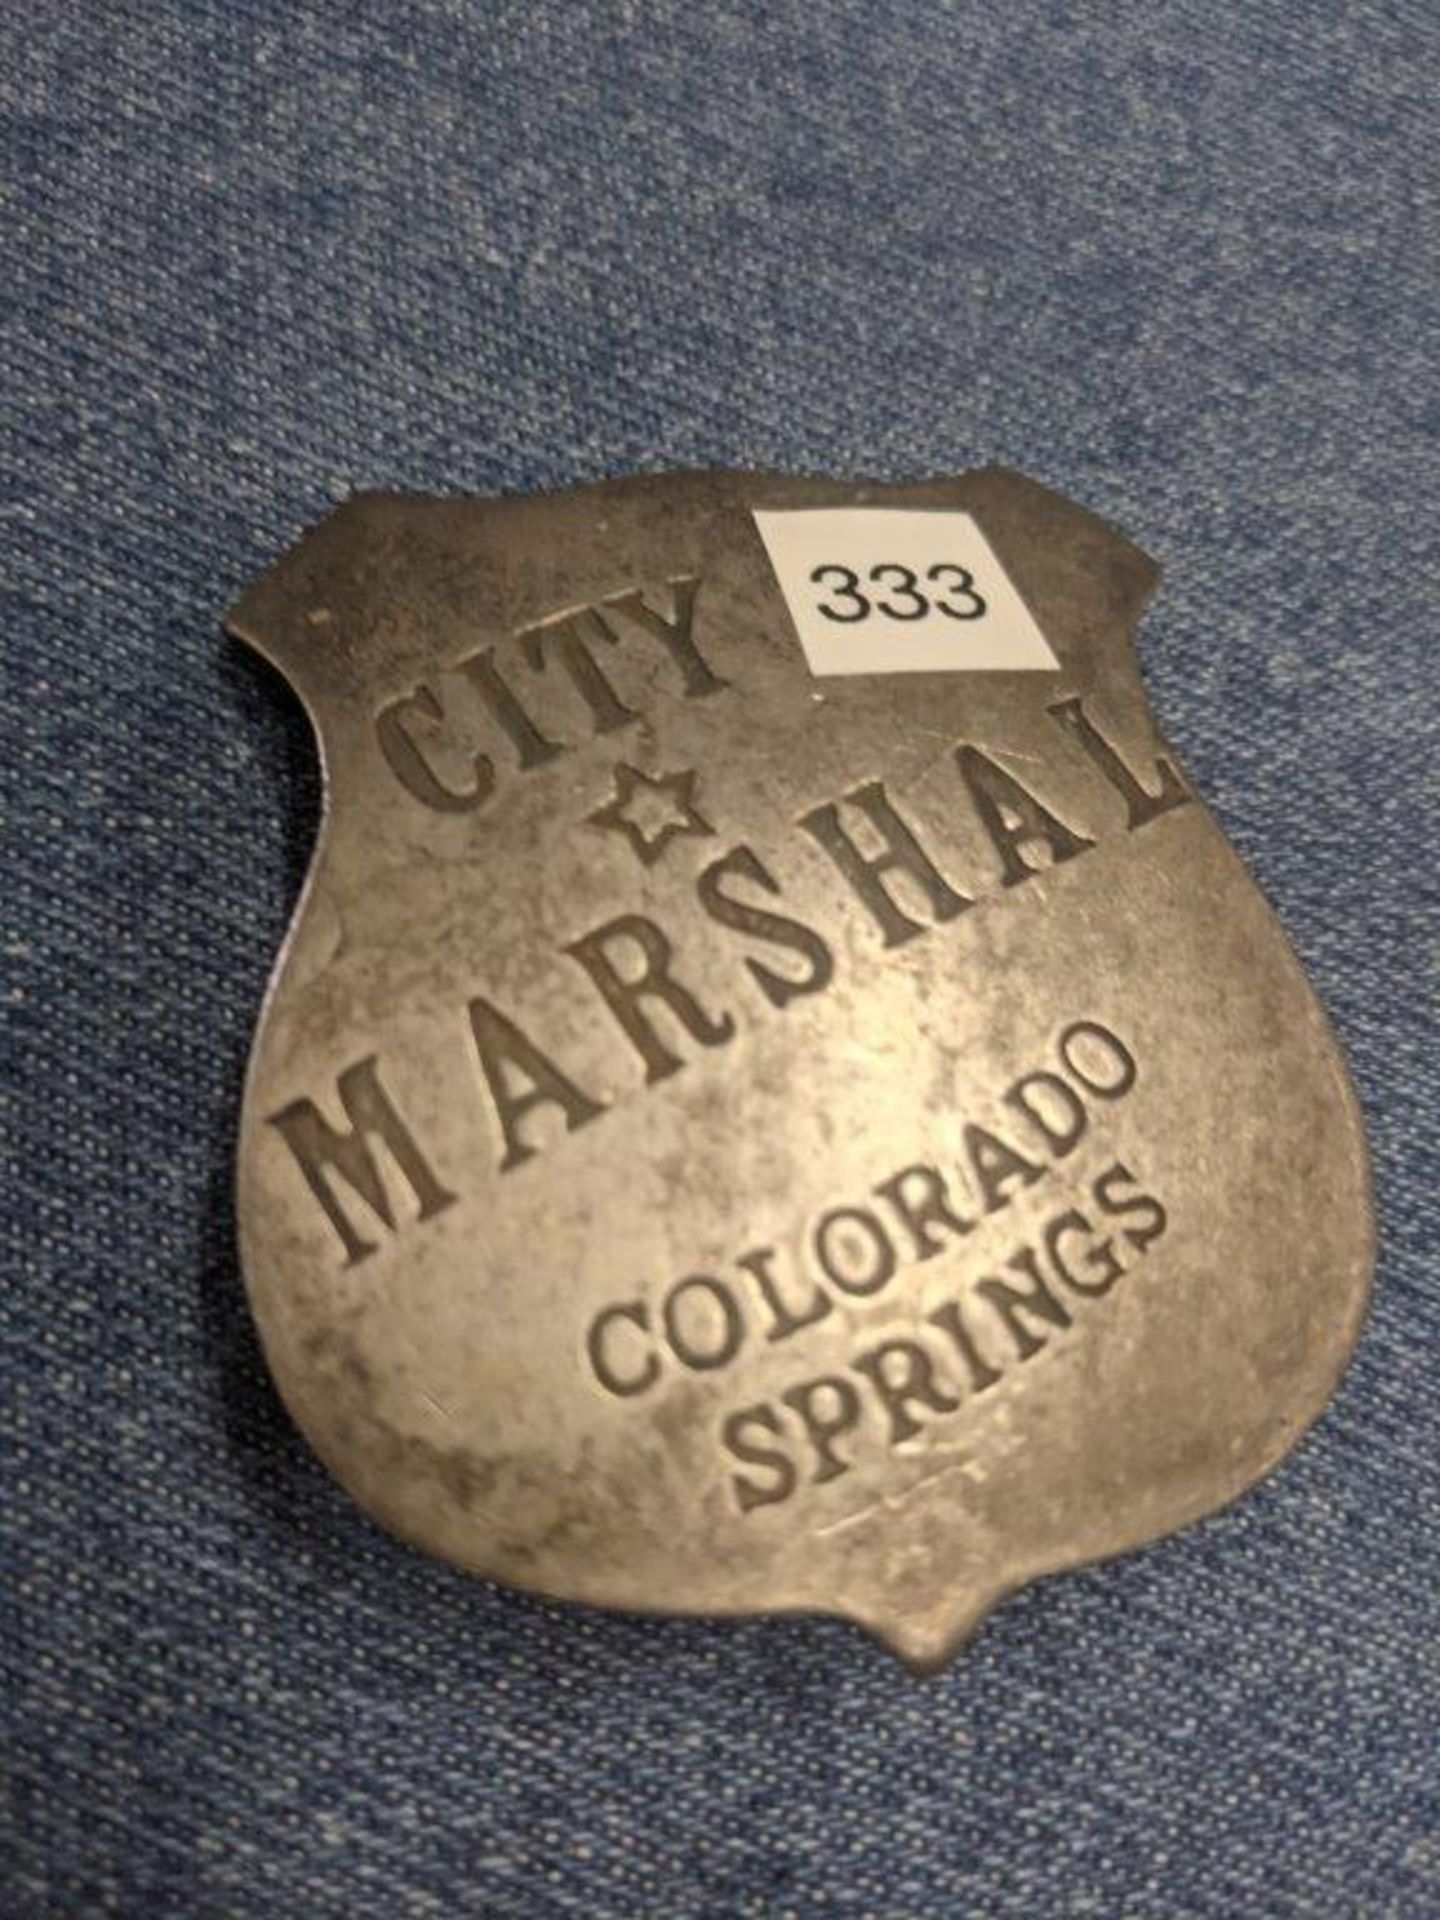 ANTIQUE SILVER MARSHALL BADGE - "COLORADO SPRINGS" - Image 6 of 6